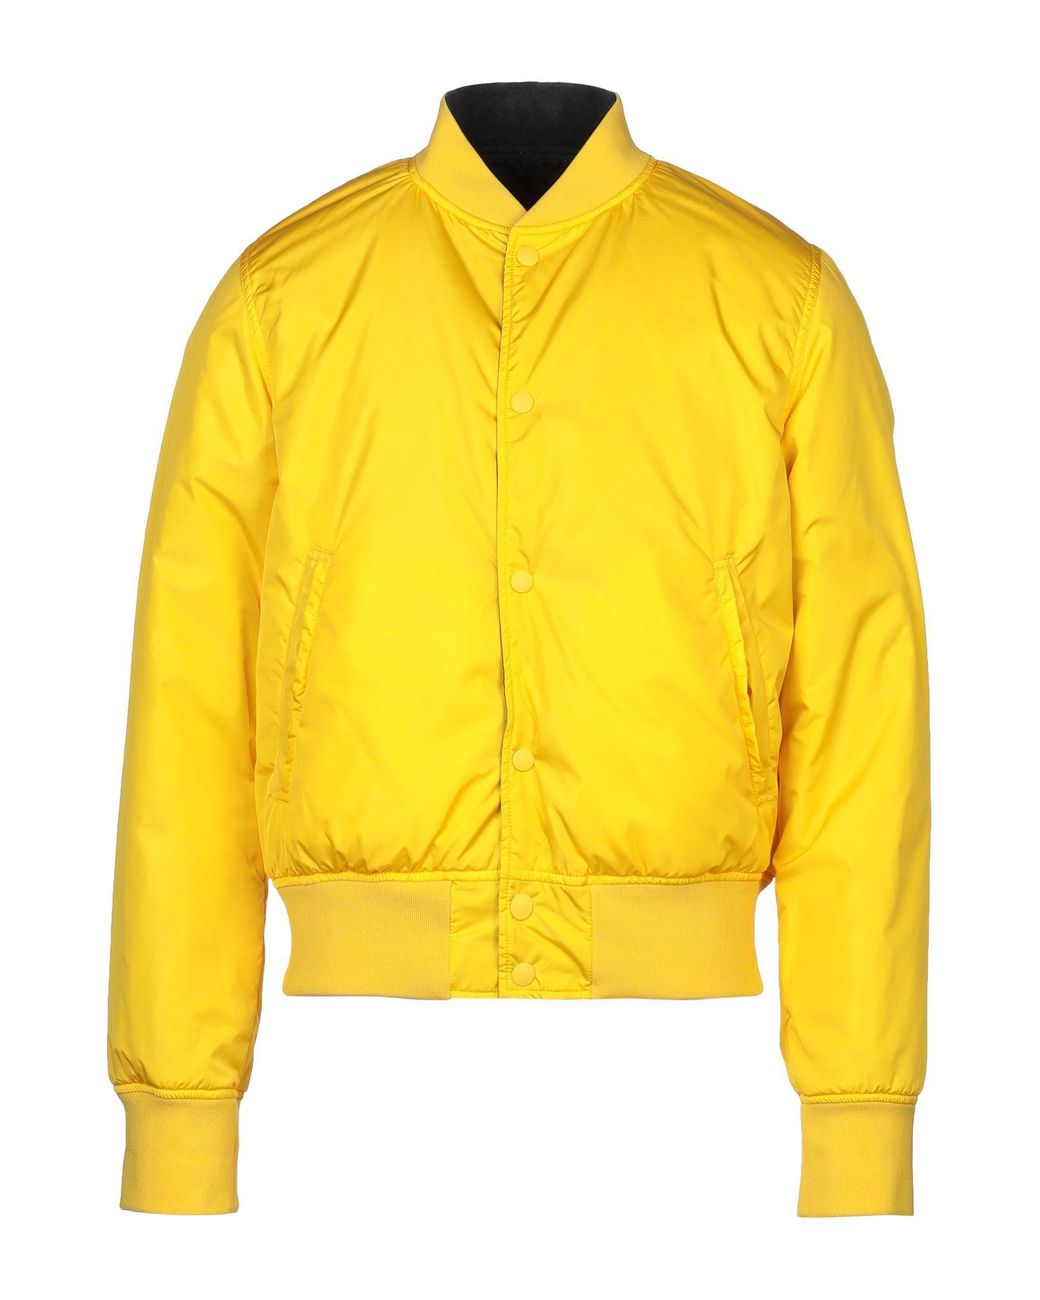 Emporio Armani Synthetic Jacket in Yellow for Men - Lyst